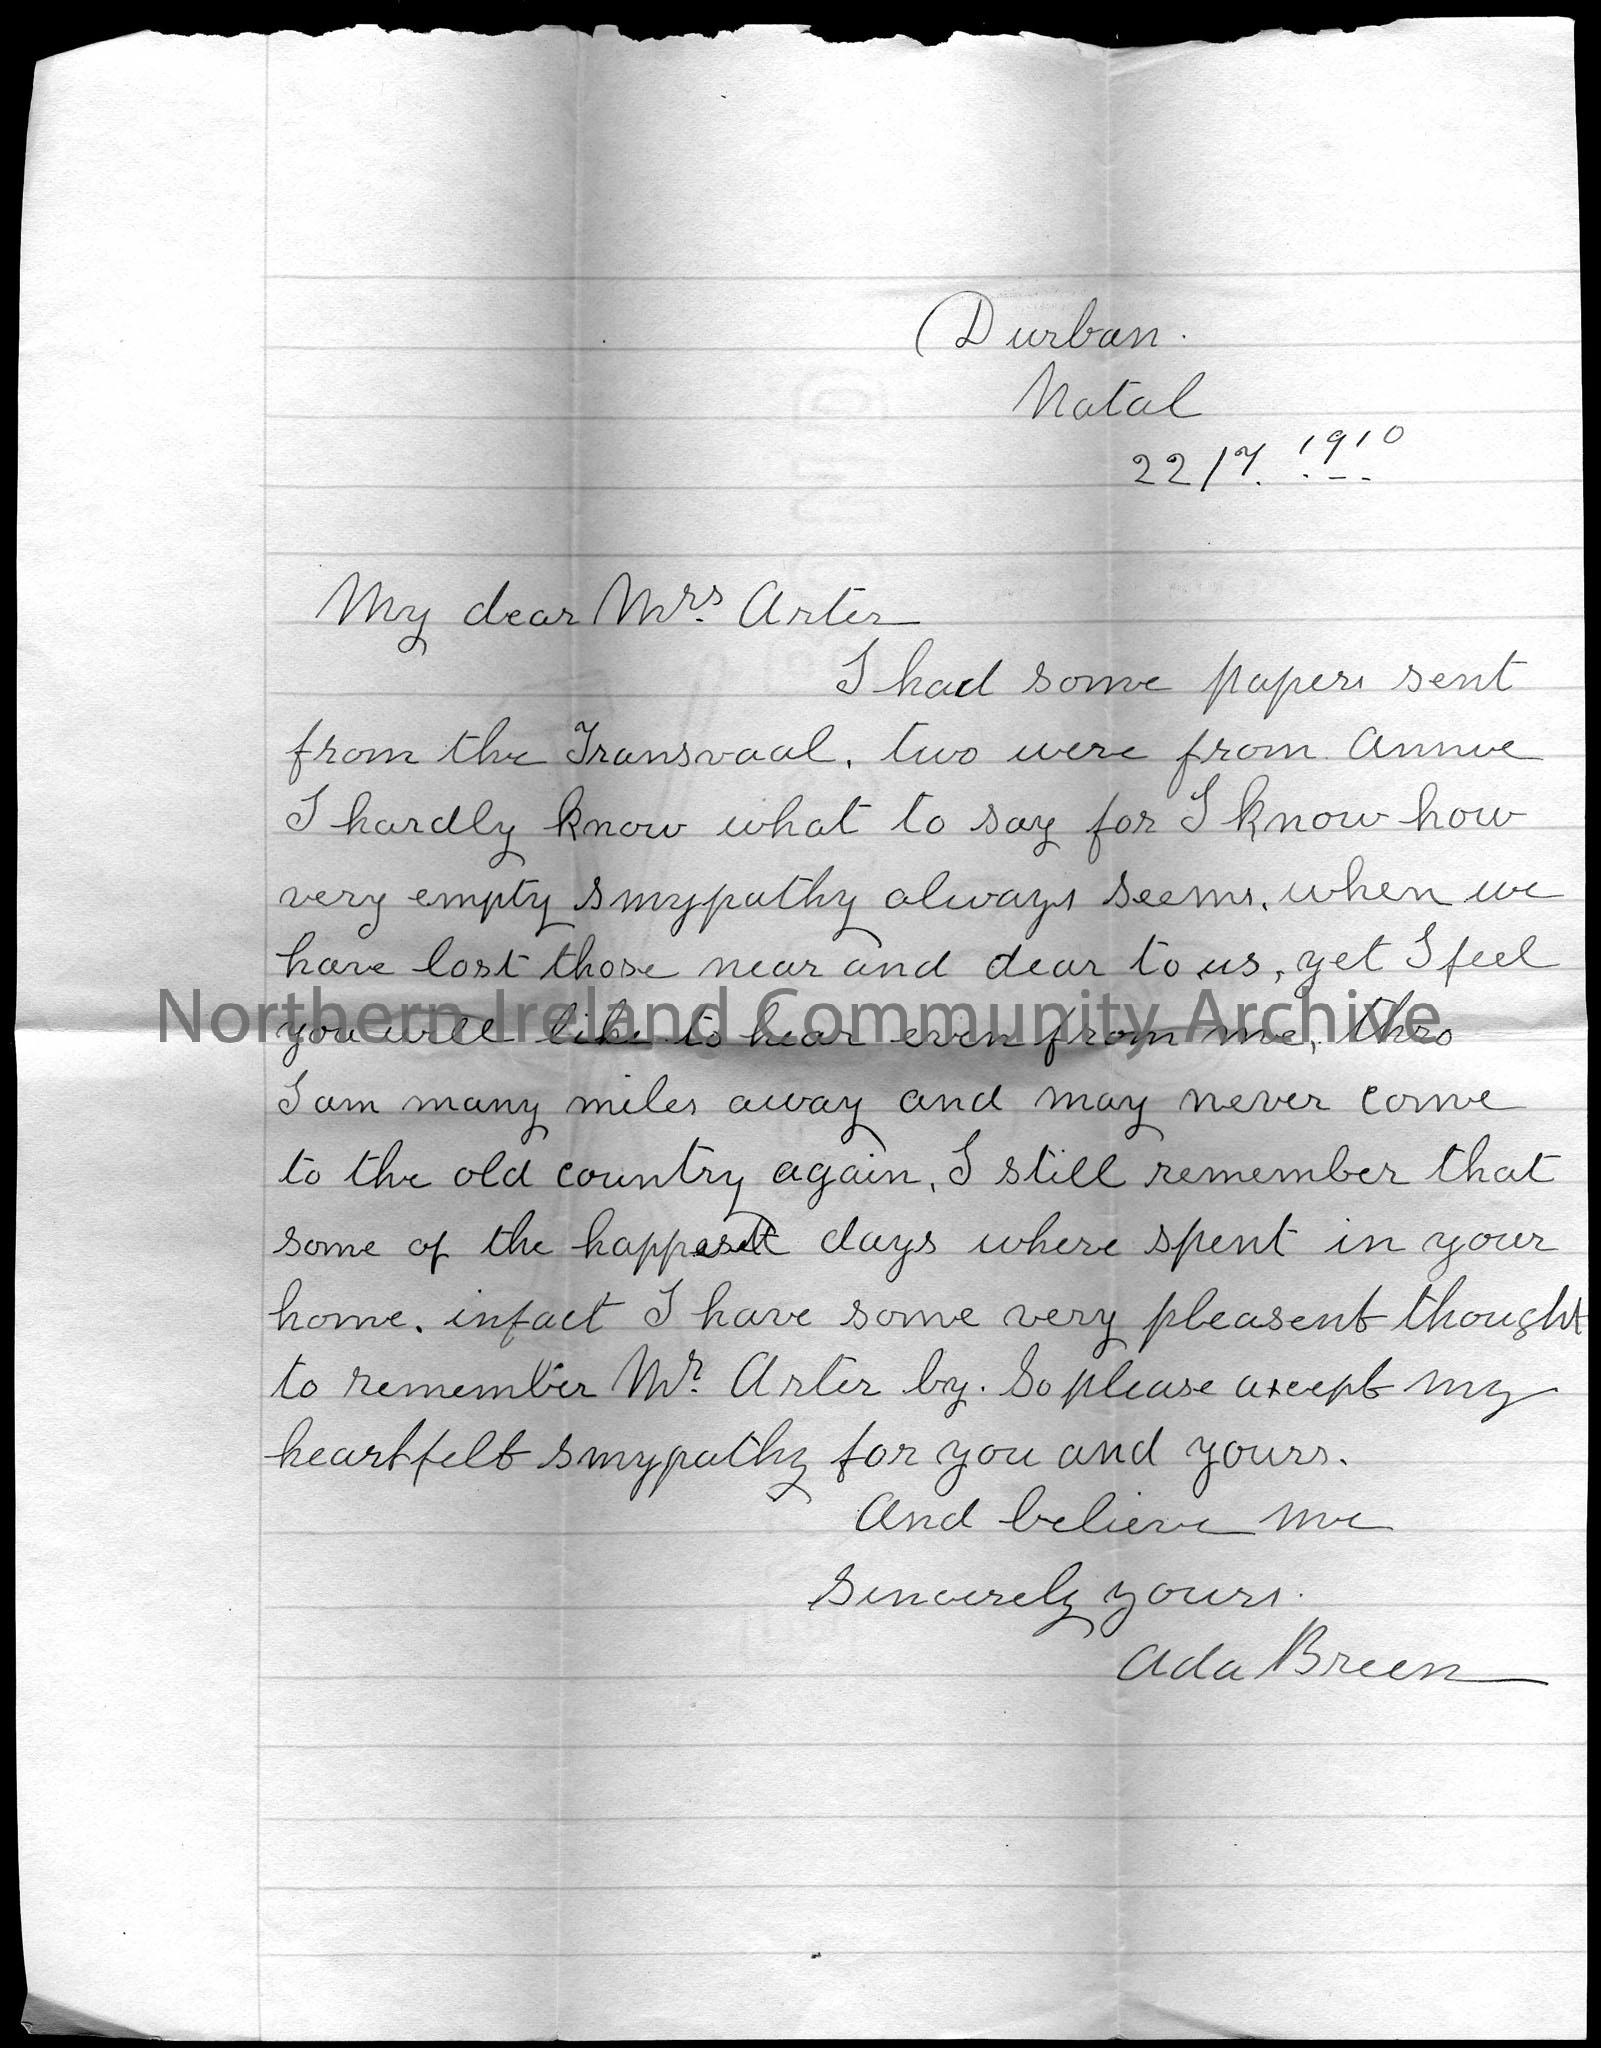 letter sent to Mrs Arter by Ada Breen? Durban Natal, dated 22d July, 1910. Ada Breen? sends her sympathy to Mrs Arter for loss of Mr Arter